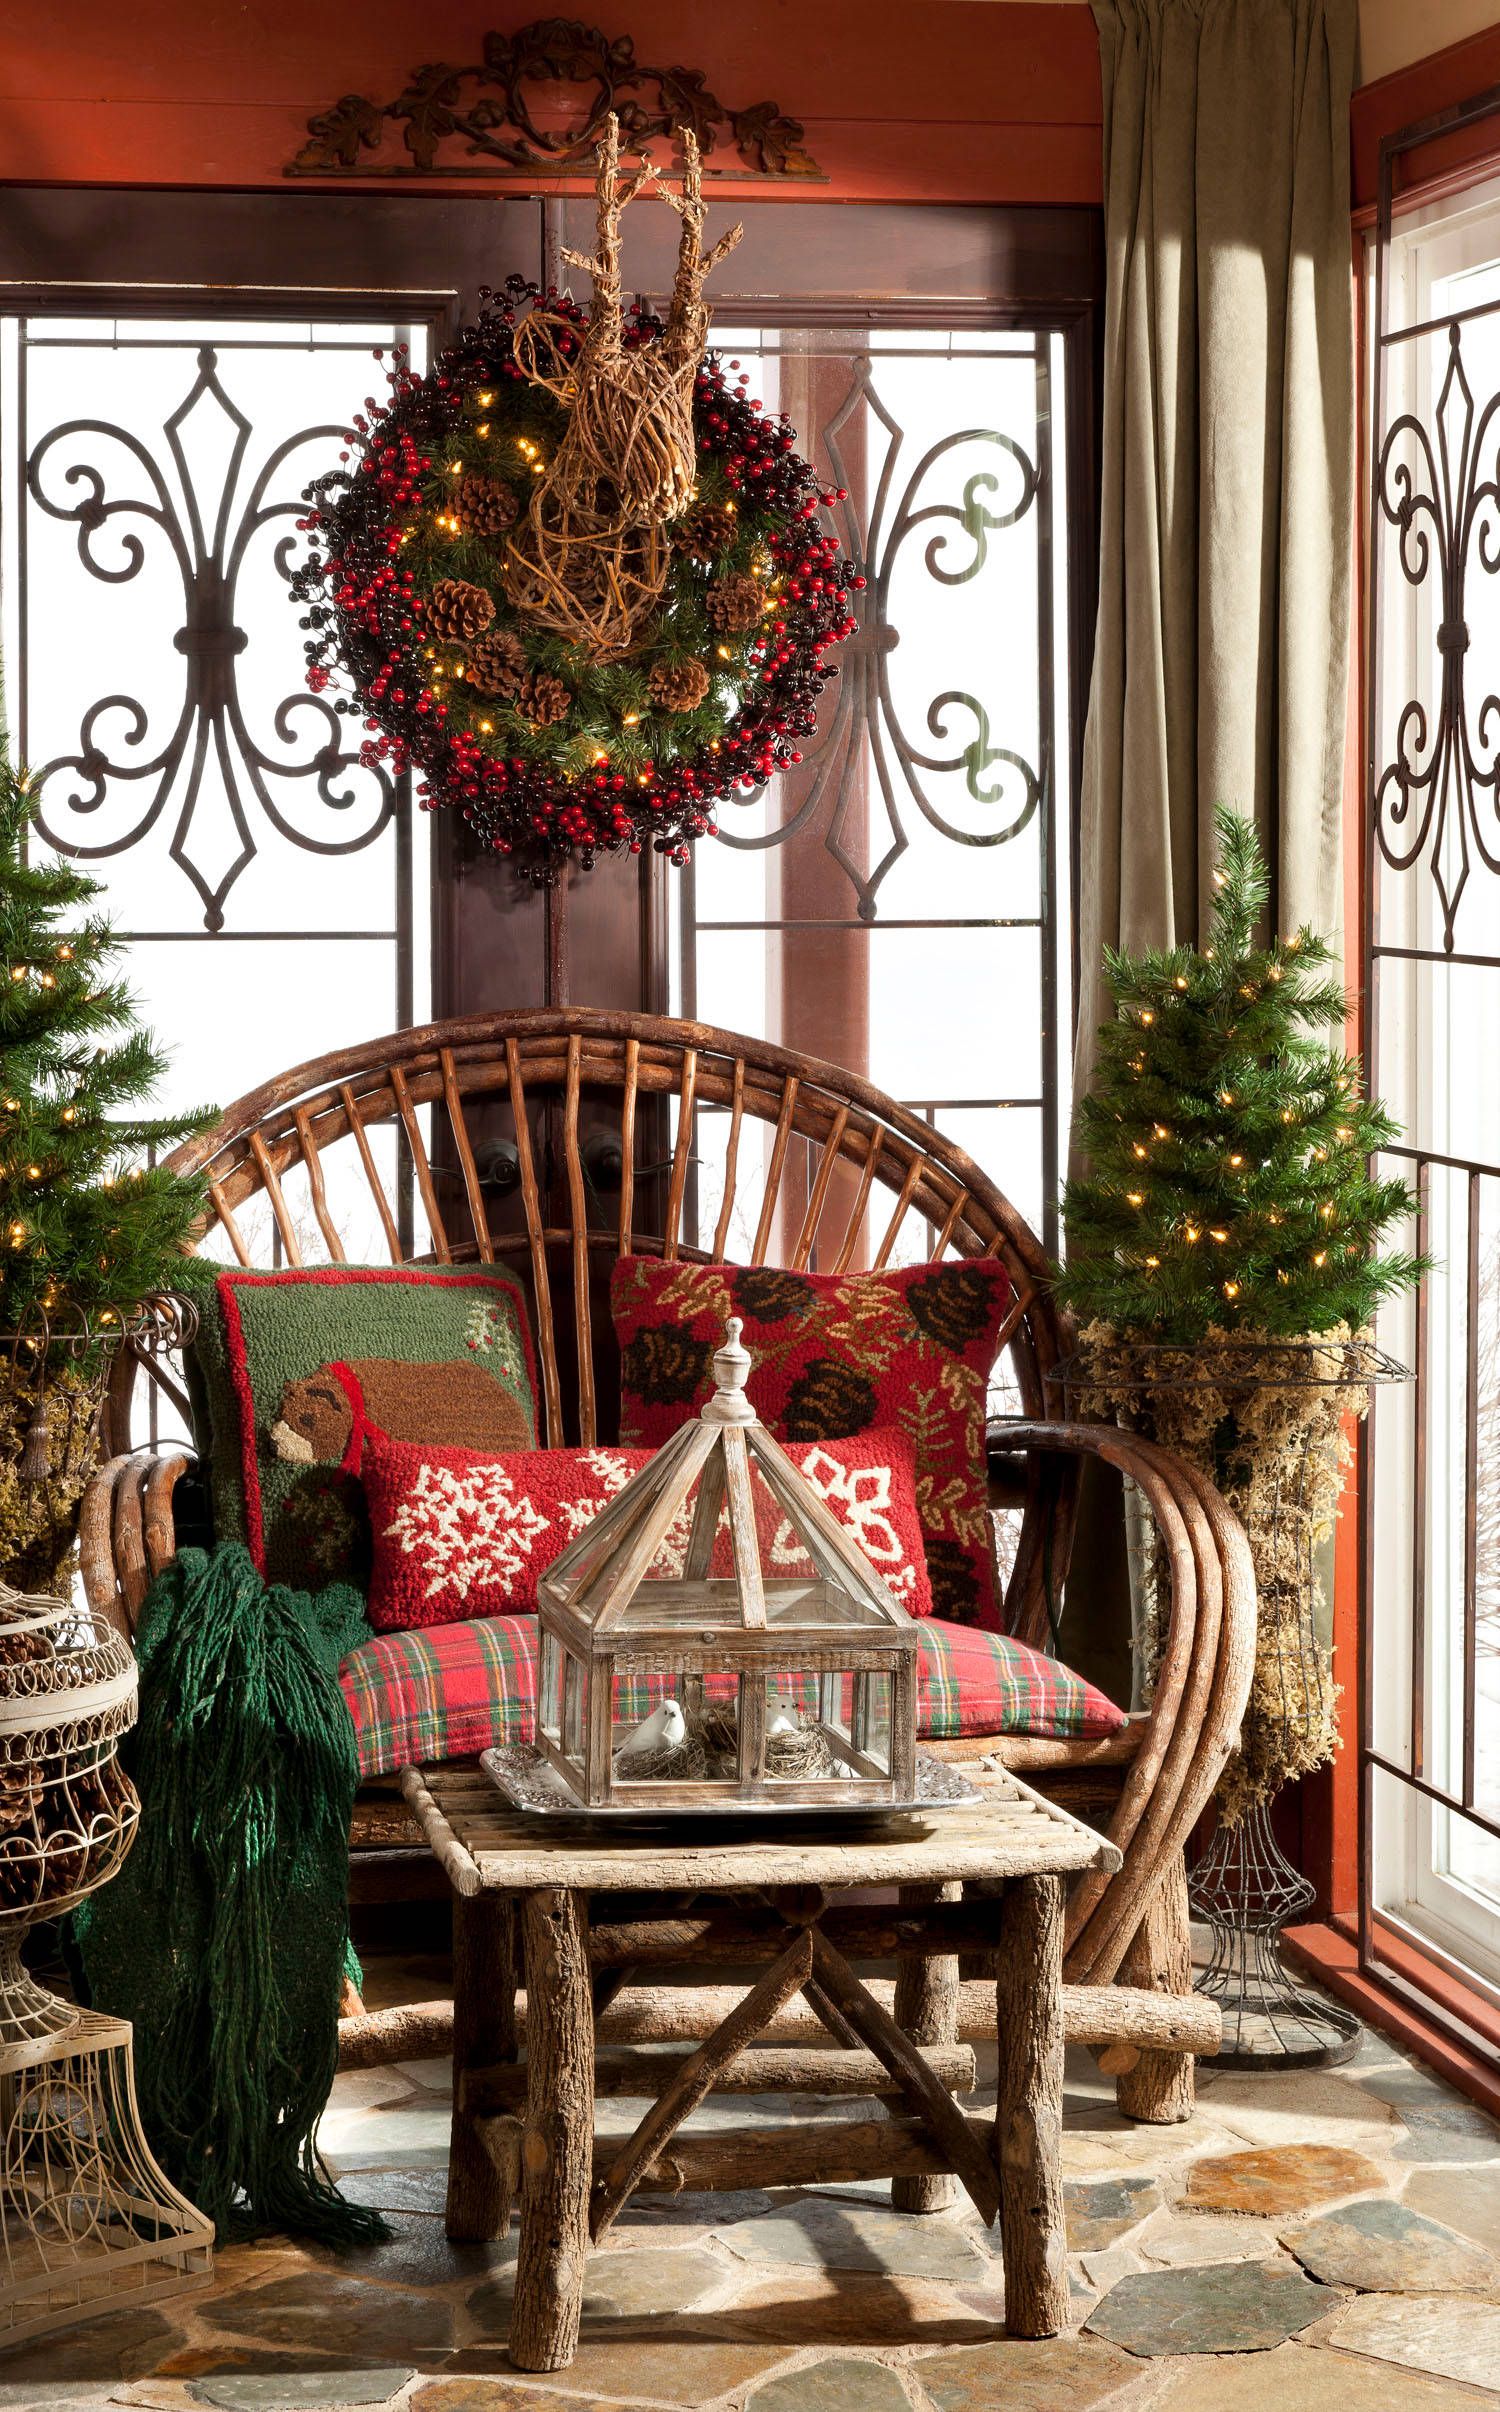 Decorating the covered from porch with rustic style for the Holidays